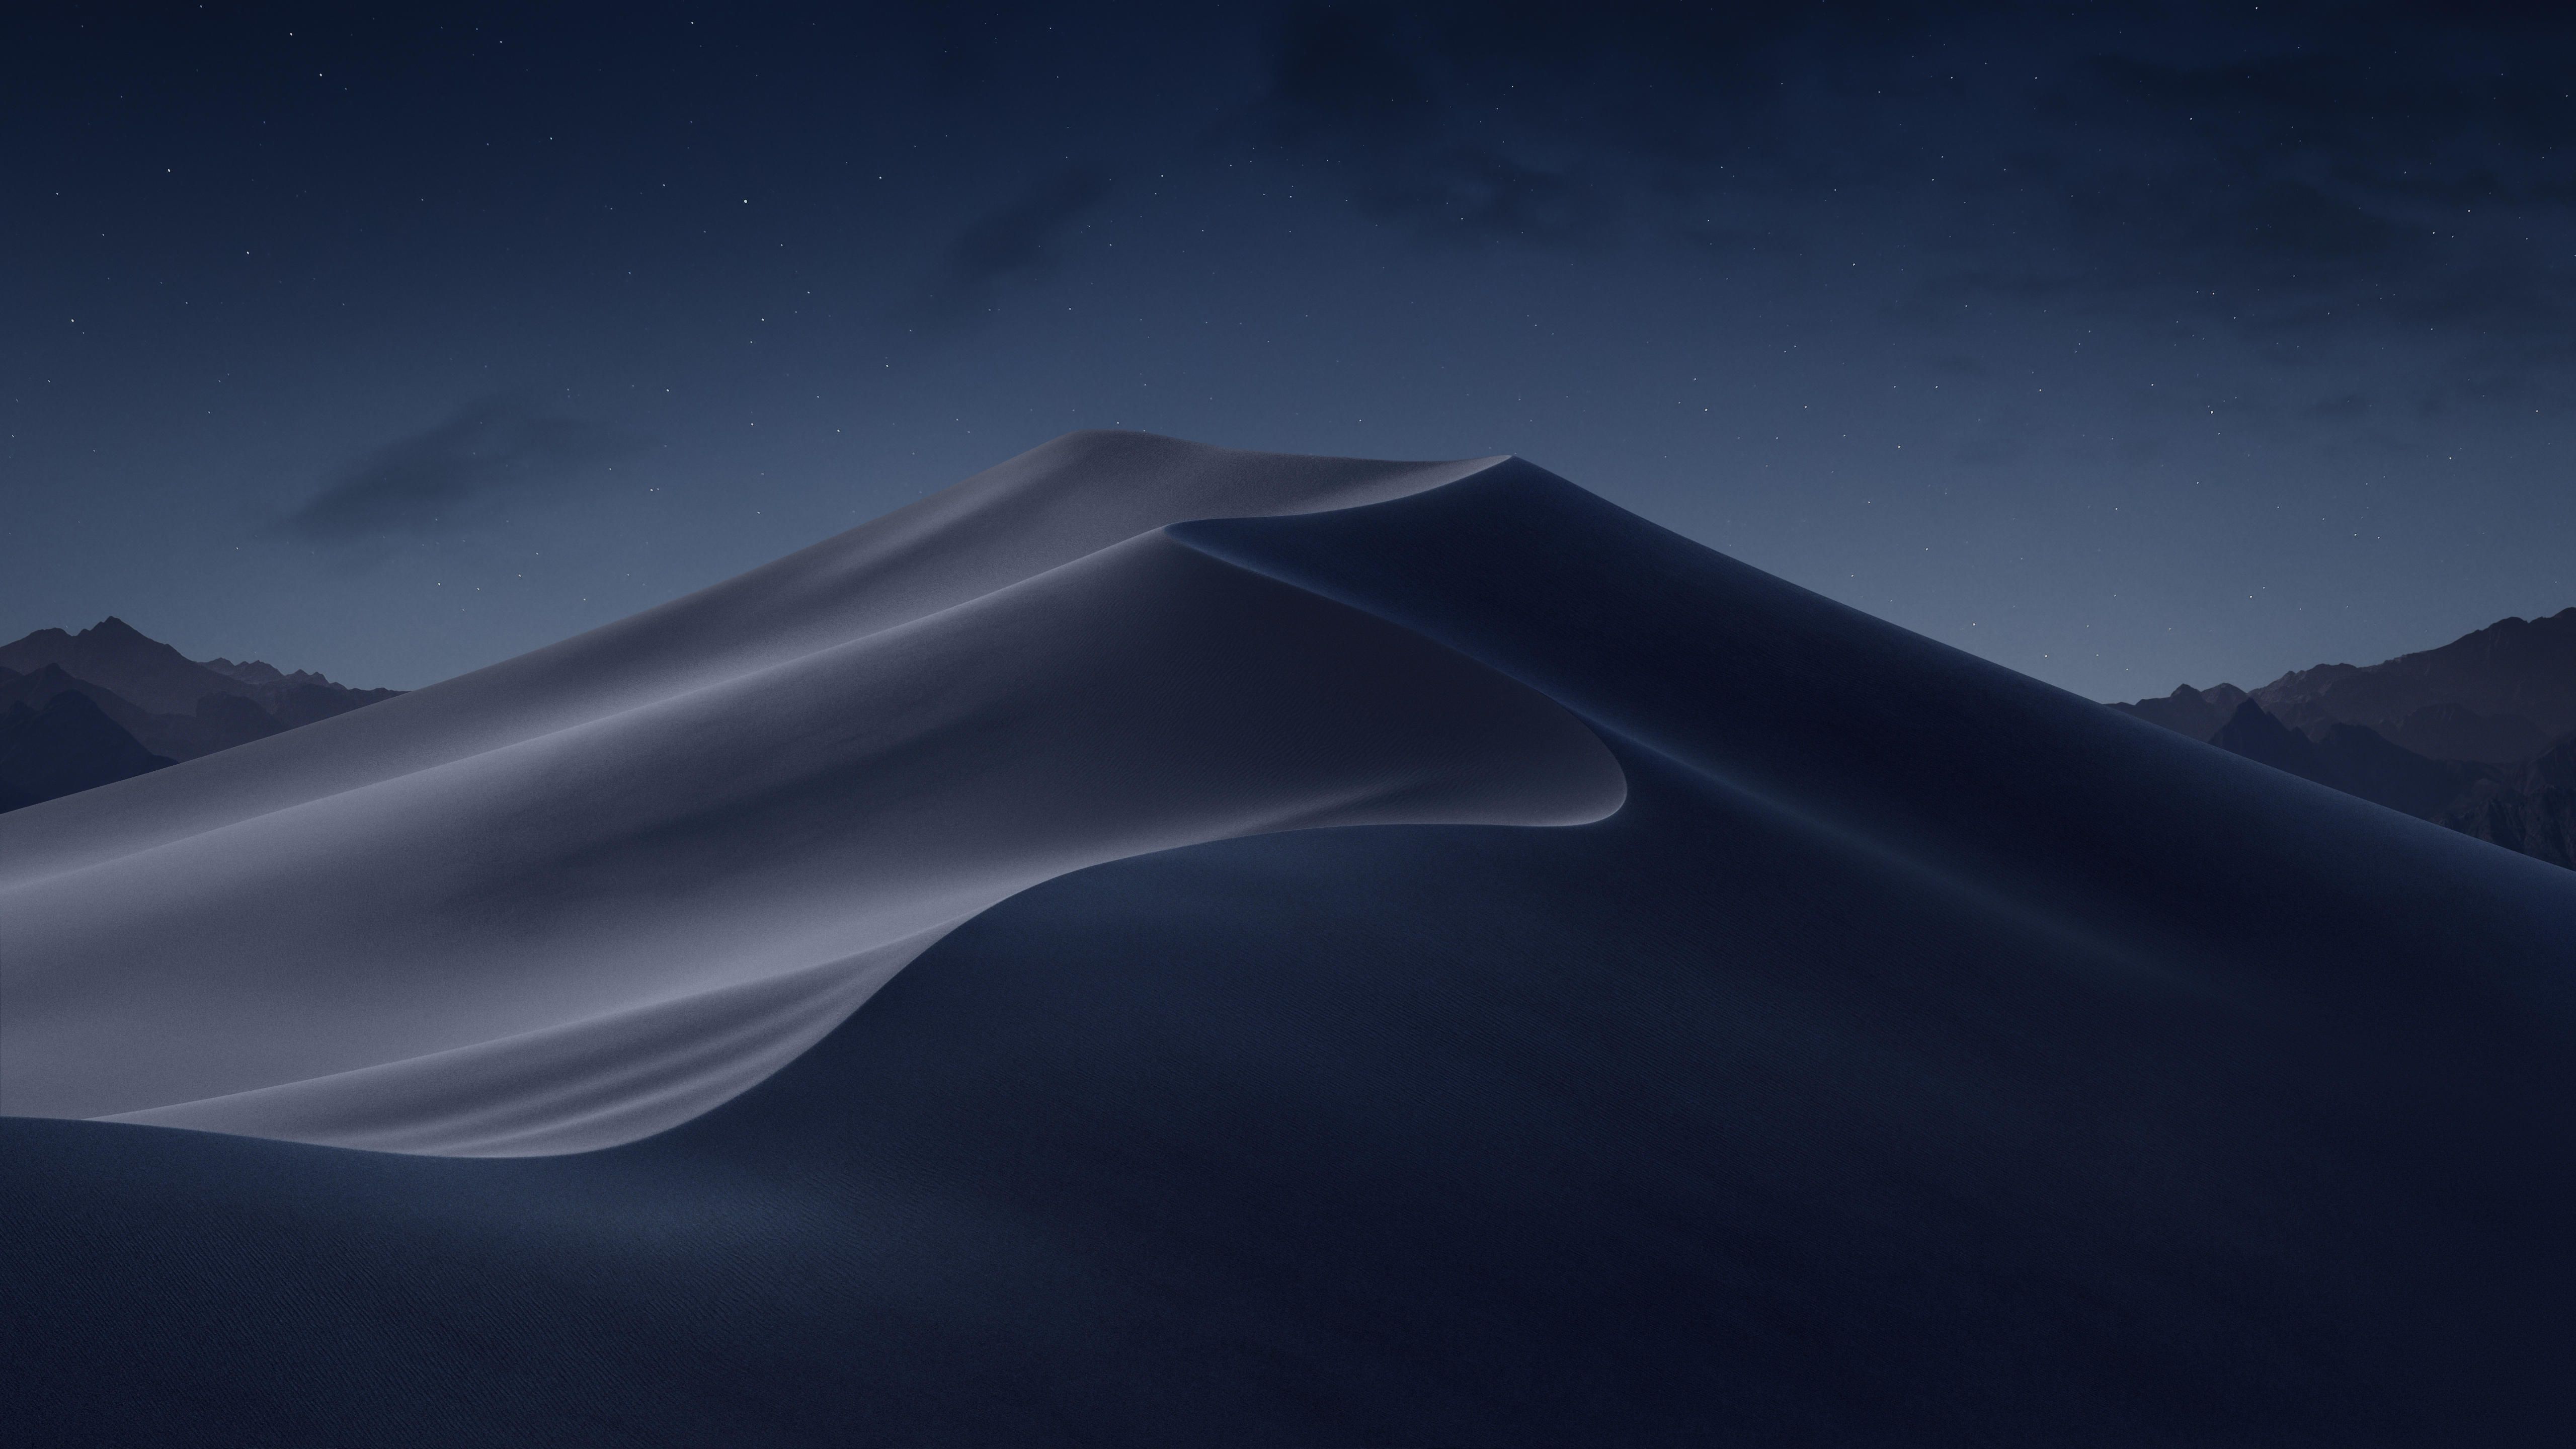 Dark mode in MacOS Mojave: How it works and what it does